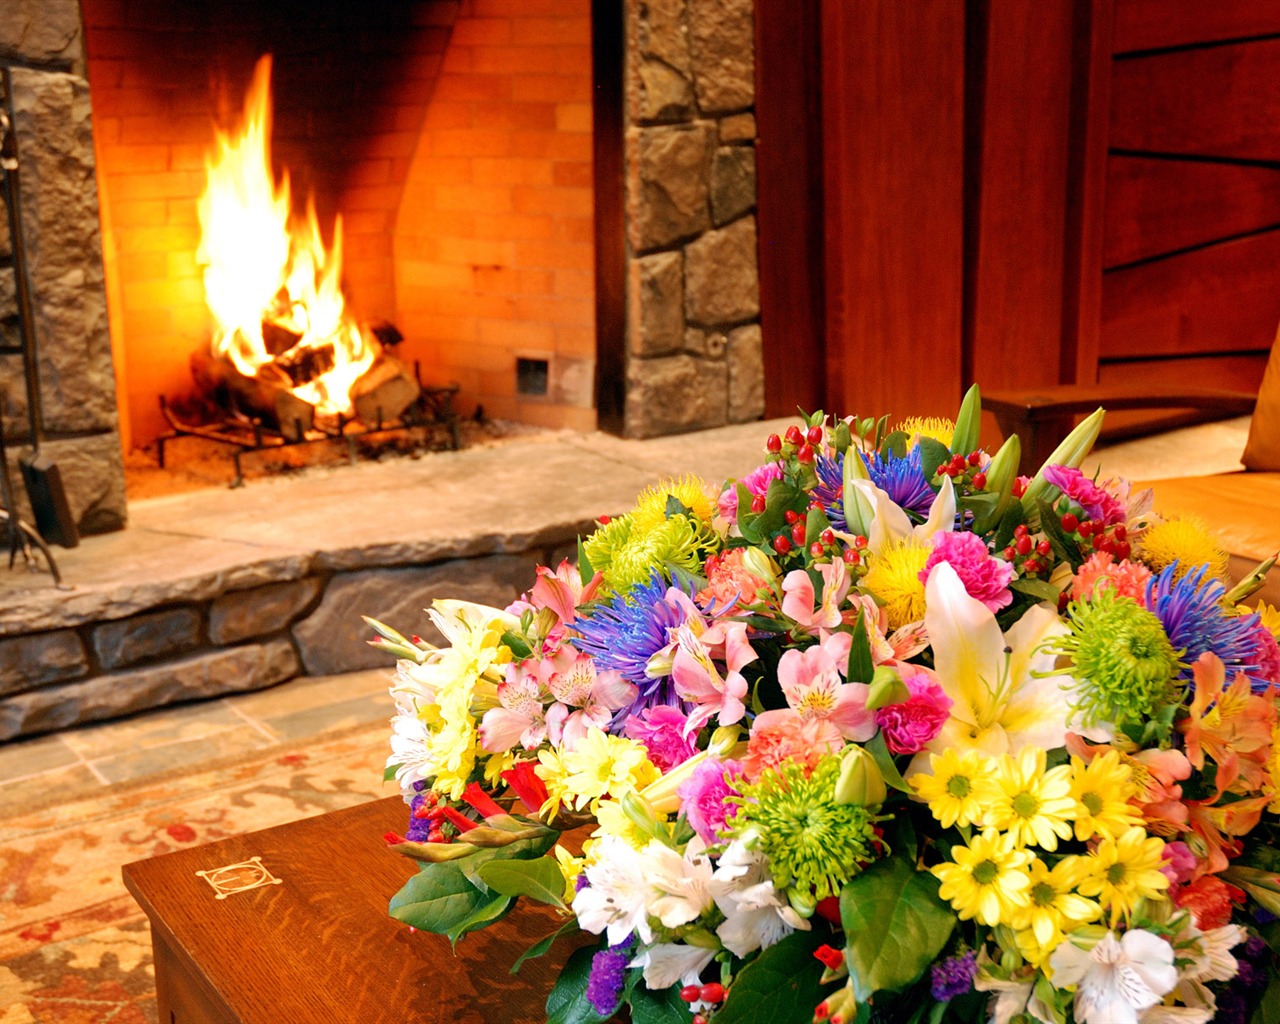 Western-style family fireplace wallpaper (1) #1 - 1280x1024